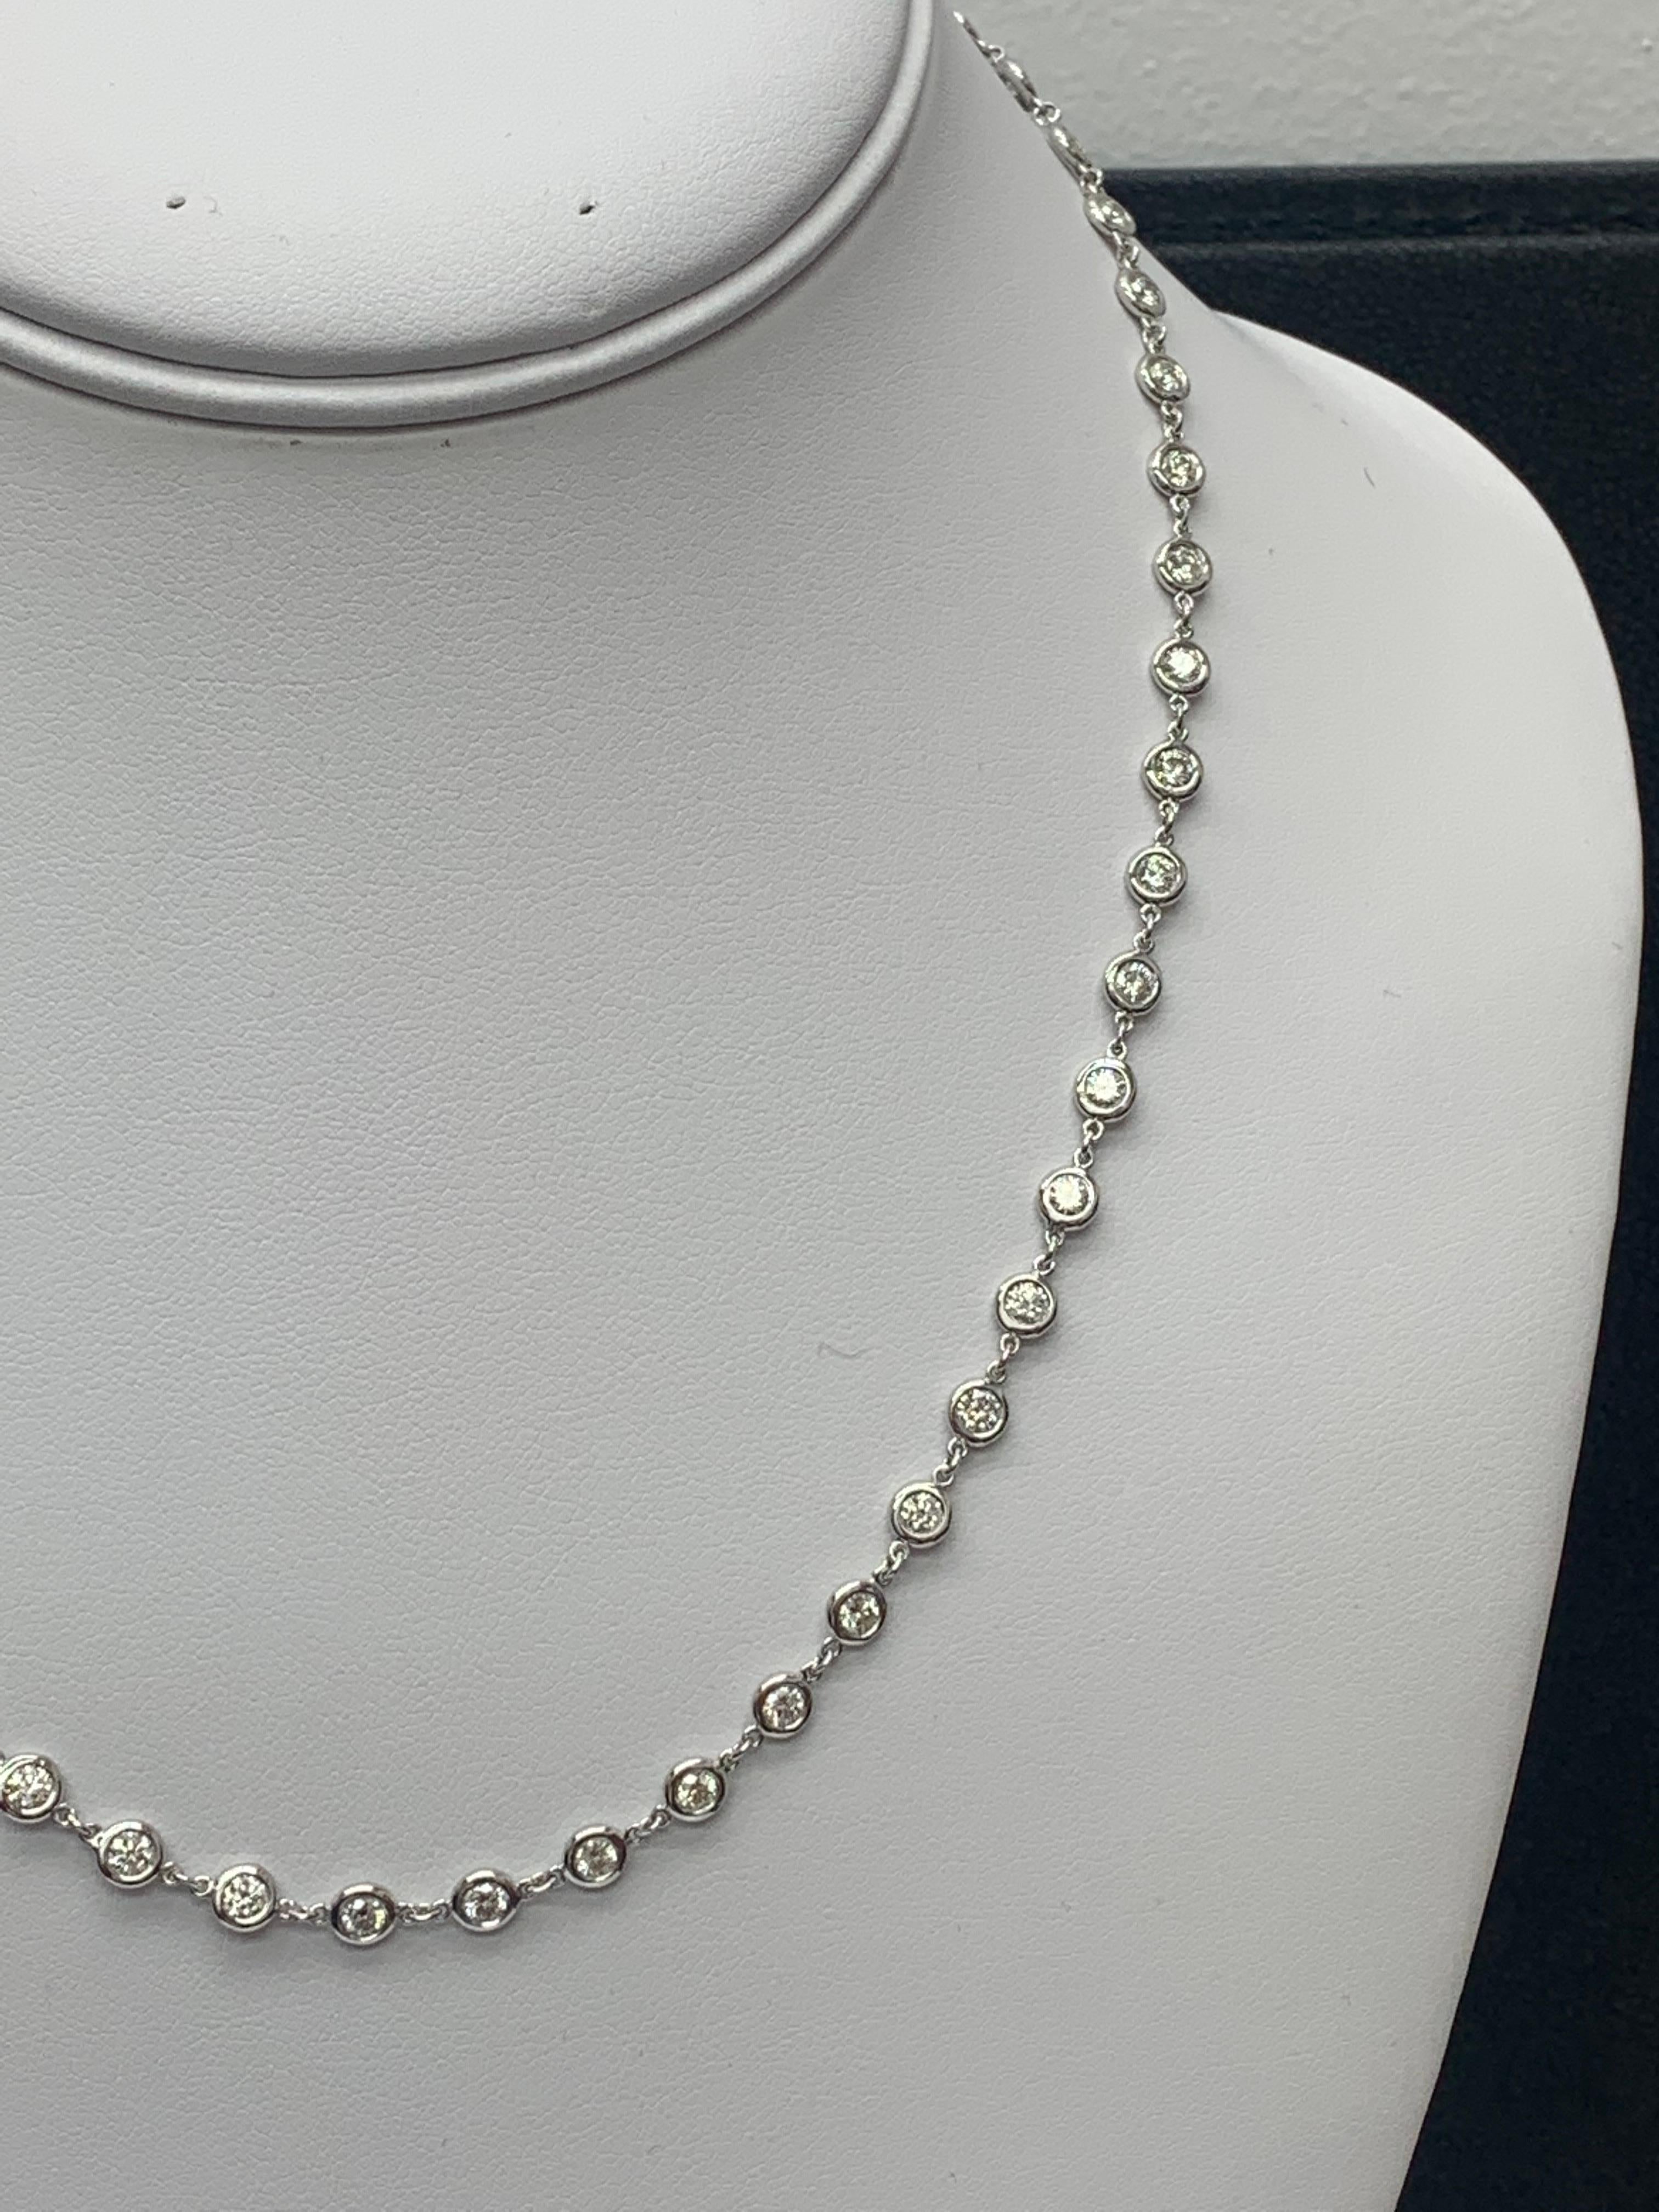 Women's 5.03 Carat Diamonds by the Yard Necklace in 14K White Gold For Sale